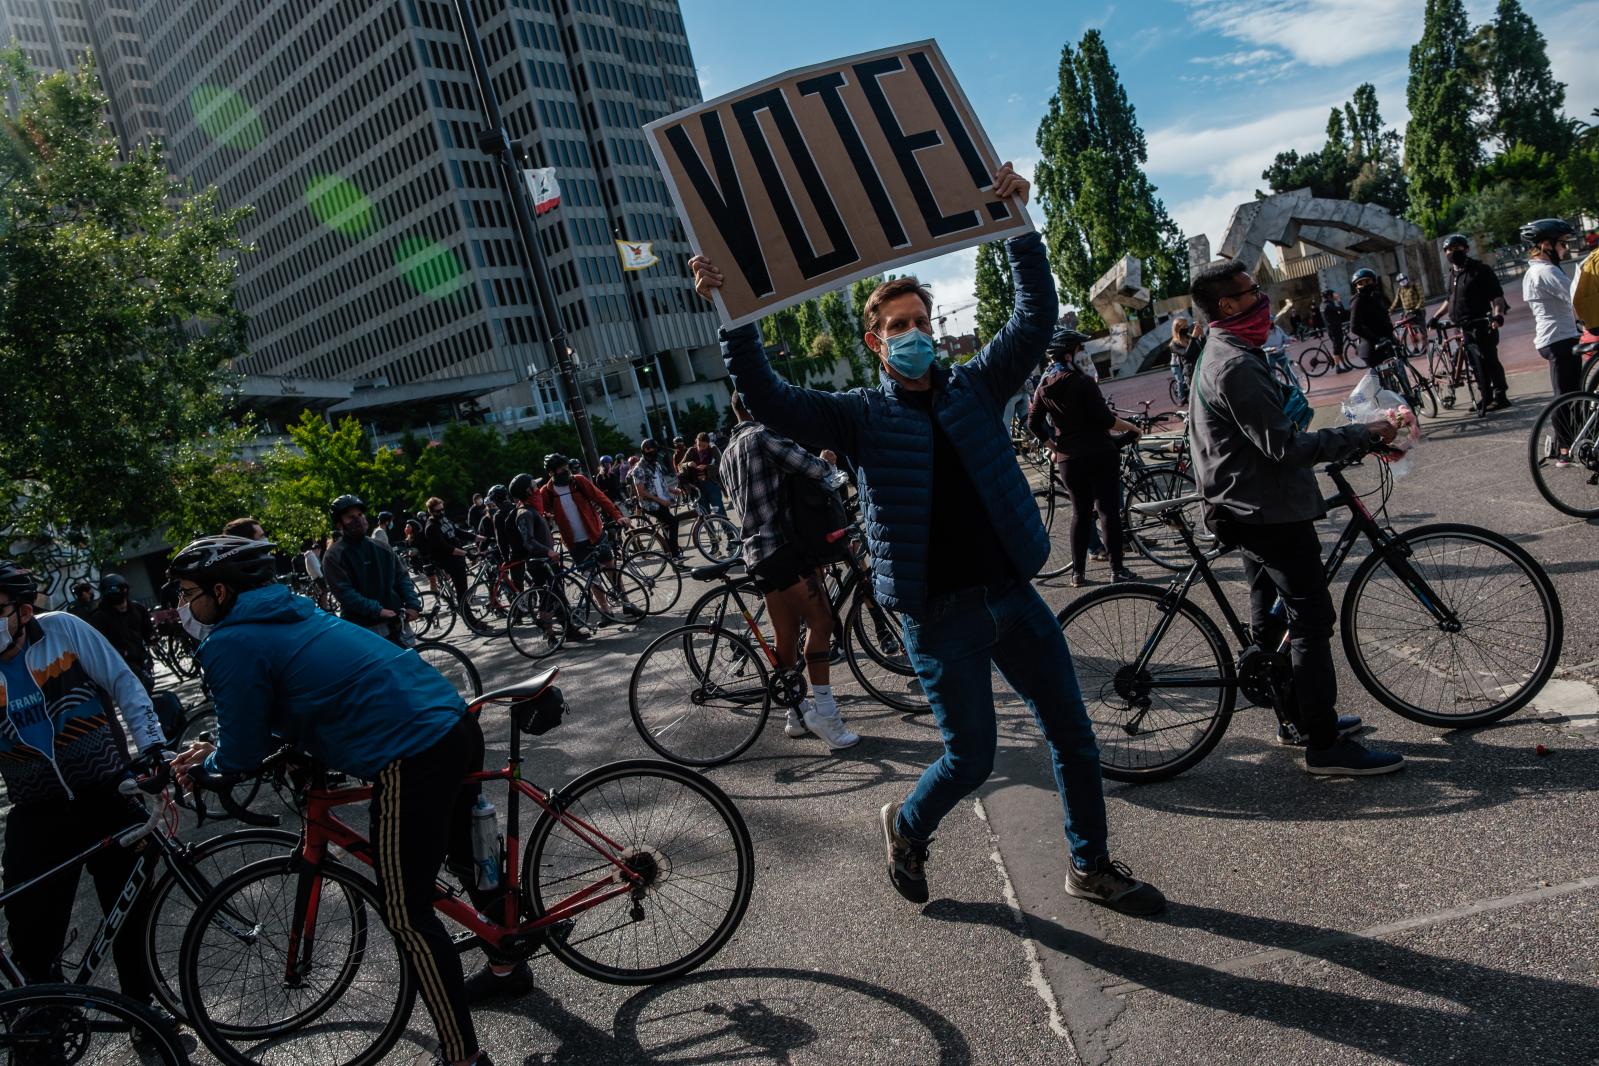 A man holds a &ldquo;Vote&rdquo; sign before the start of a Critical Mass style solidarity ride to demand an end to police violence in San Francisco on Friday, June 5, 2020.